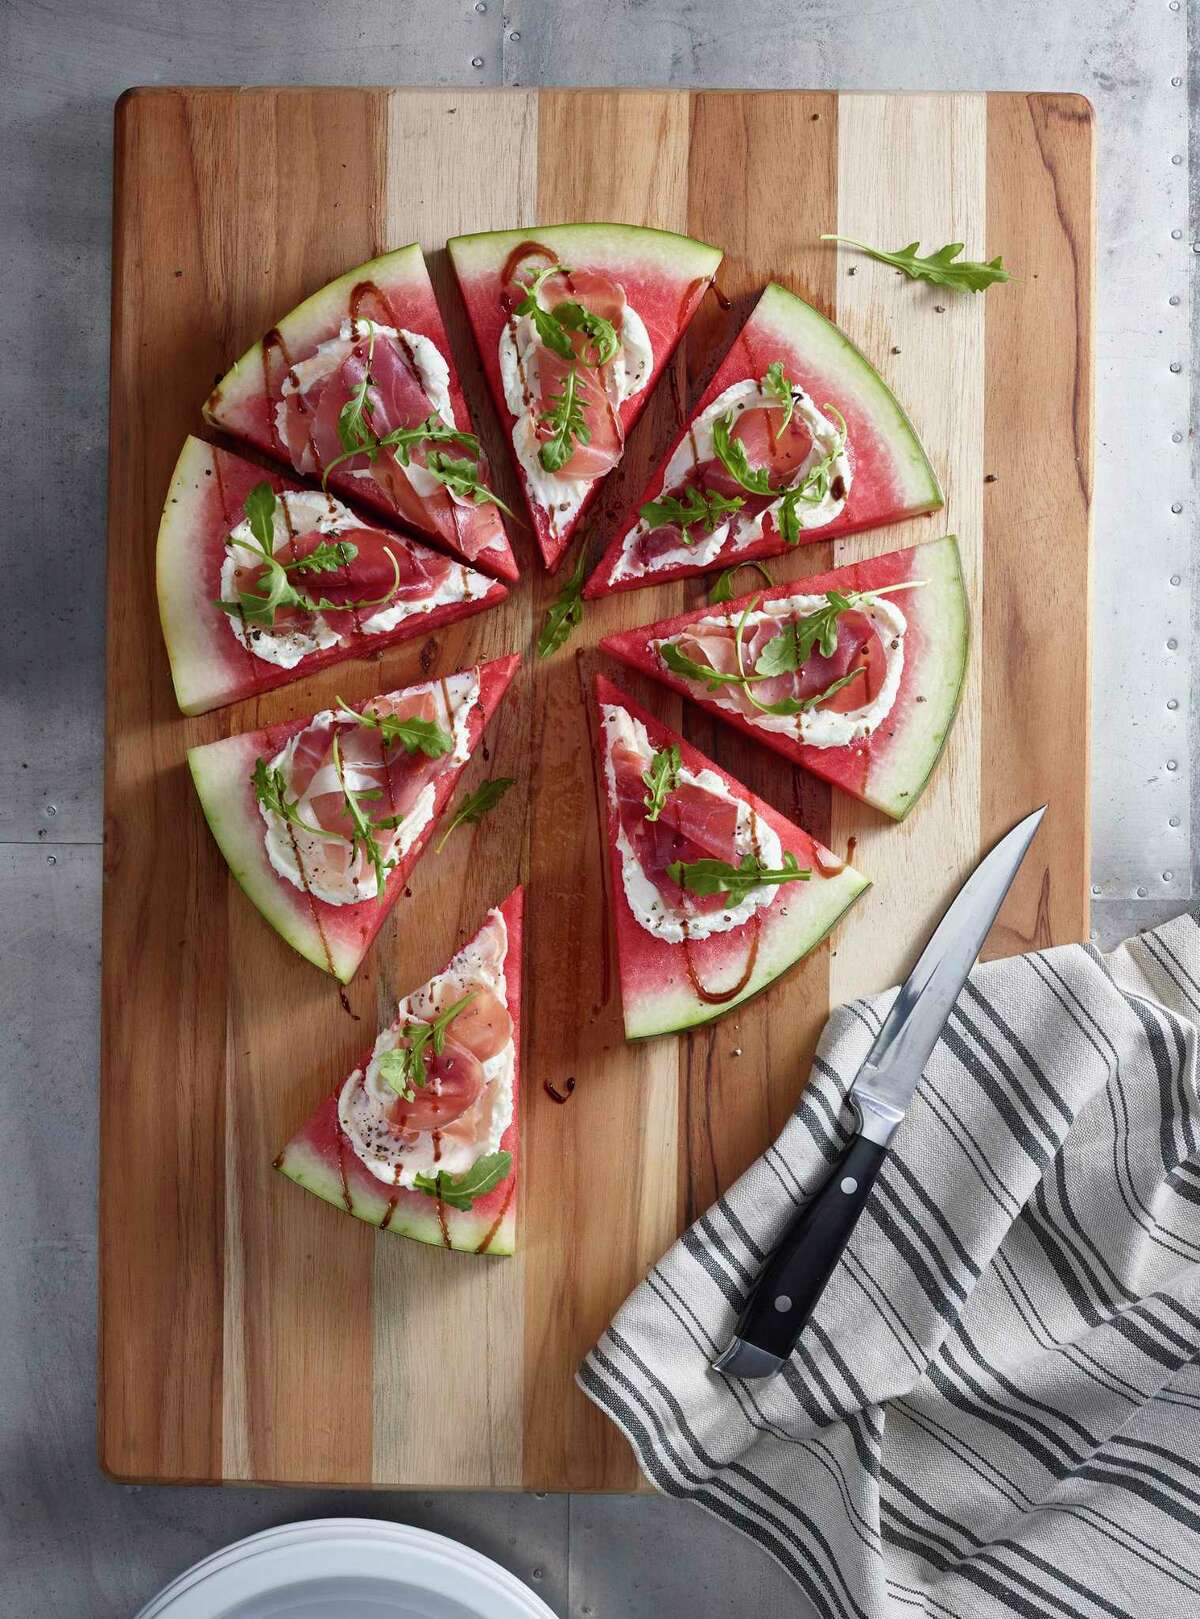 Savory Watermelon Pizza (recipe in column): Paired with savory ingredients like prosciutto and goat cheese, this savory “pizza” skips the bread to make watermelon the new star.